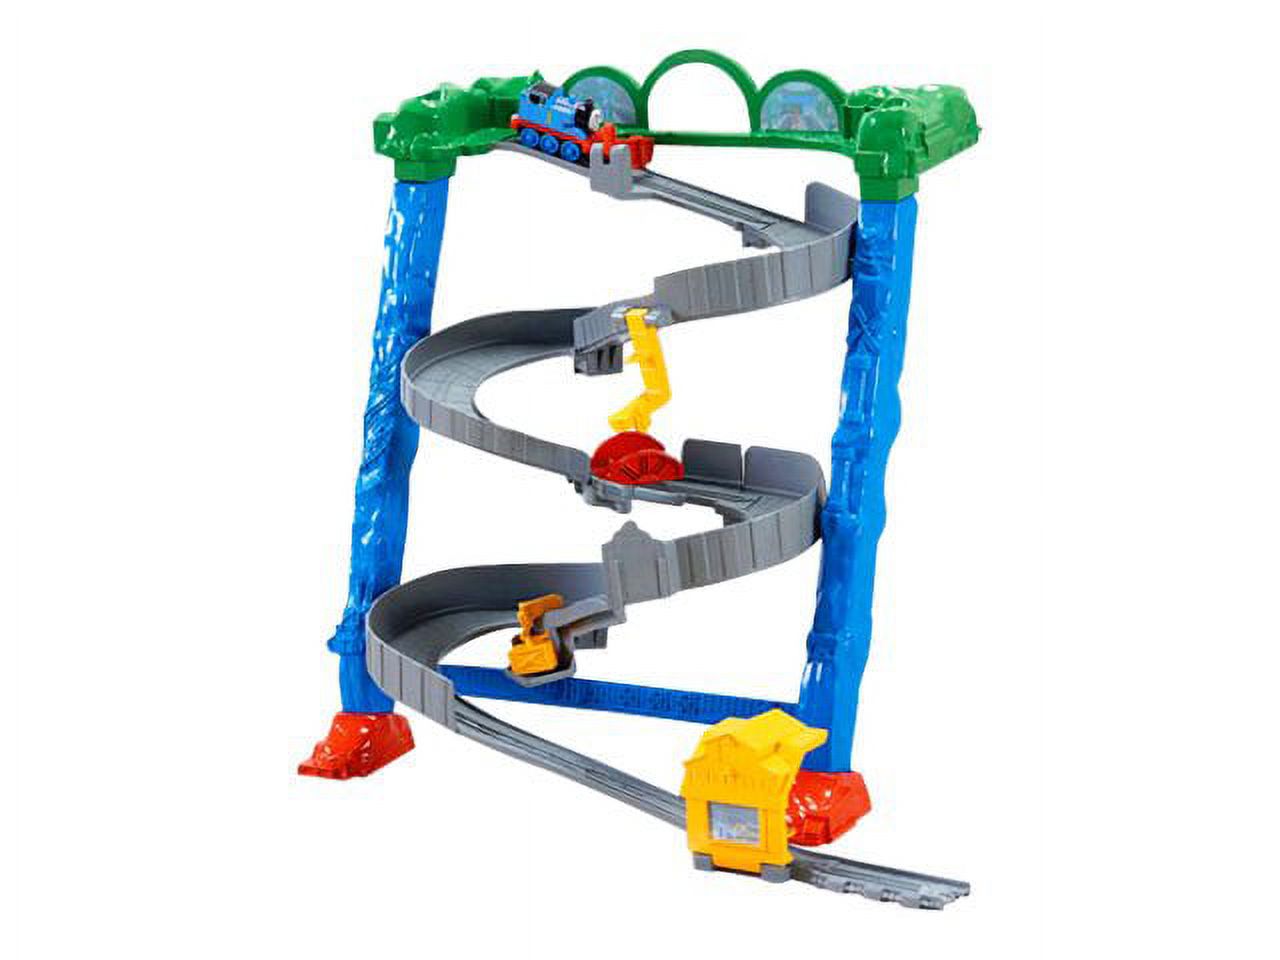 Fisher-Price Thomas & Friends Take-n-Play - Spills & Thrills on Sodor - image 1 of 8